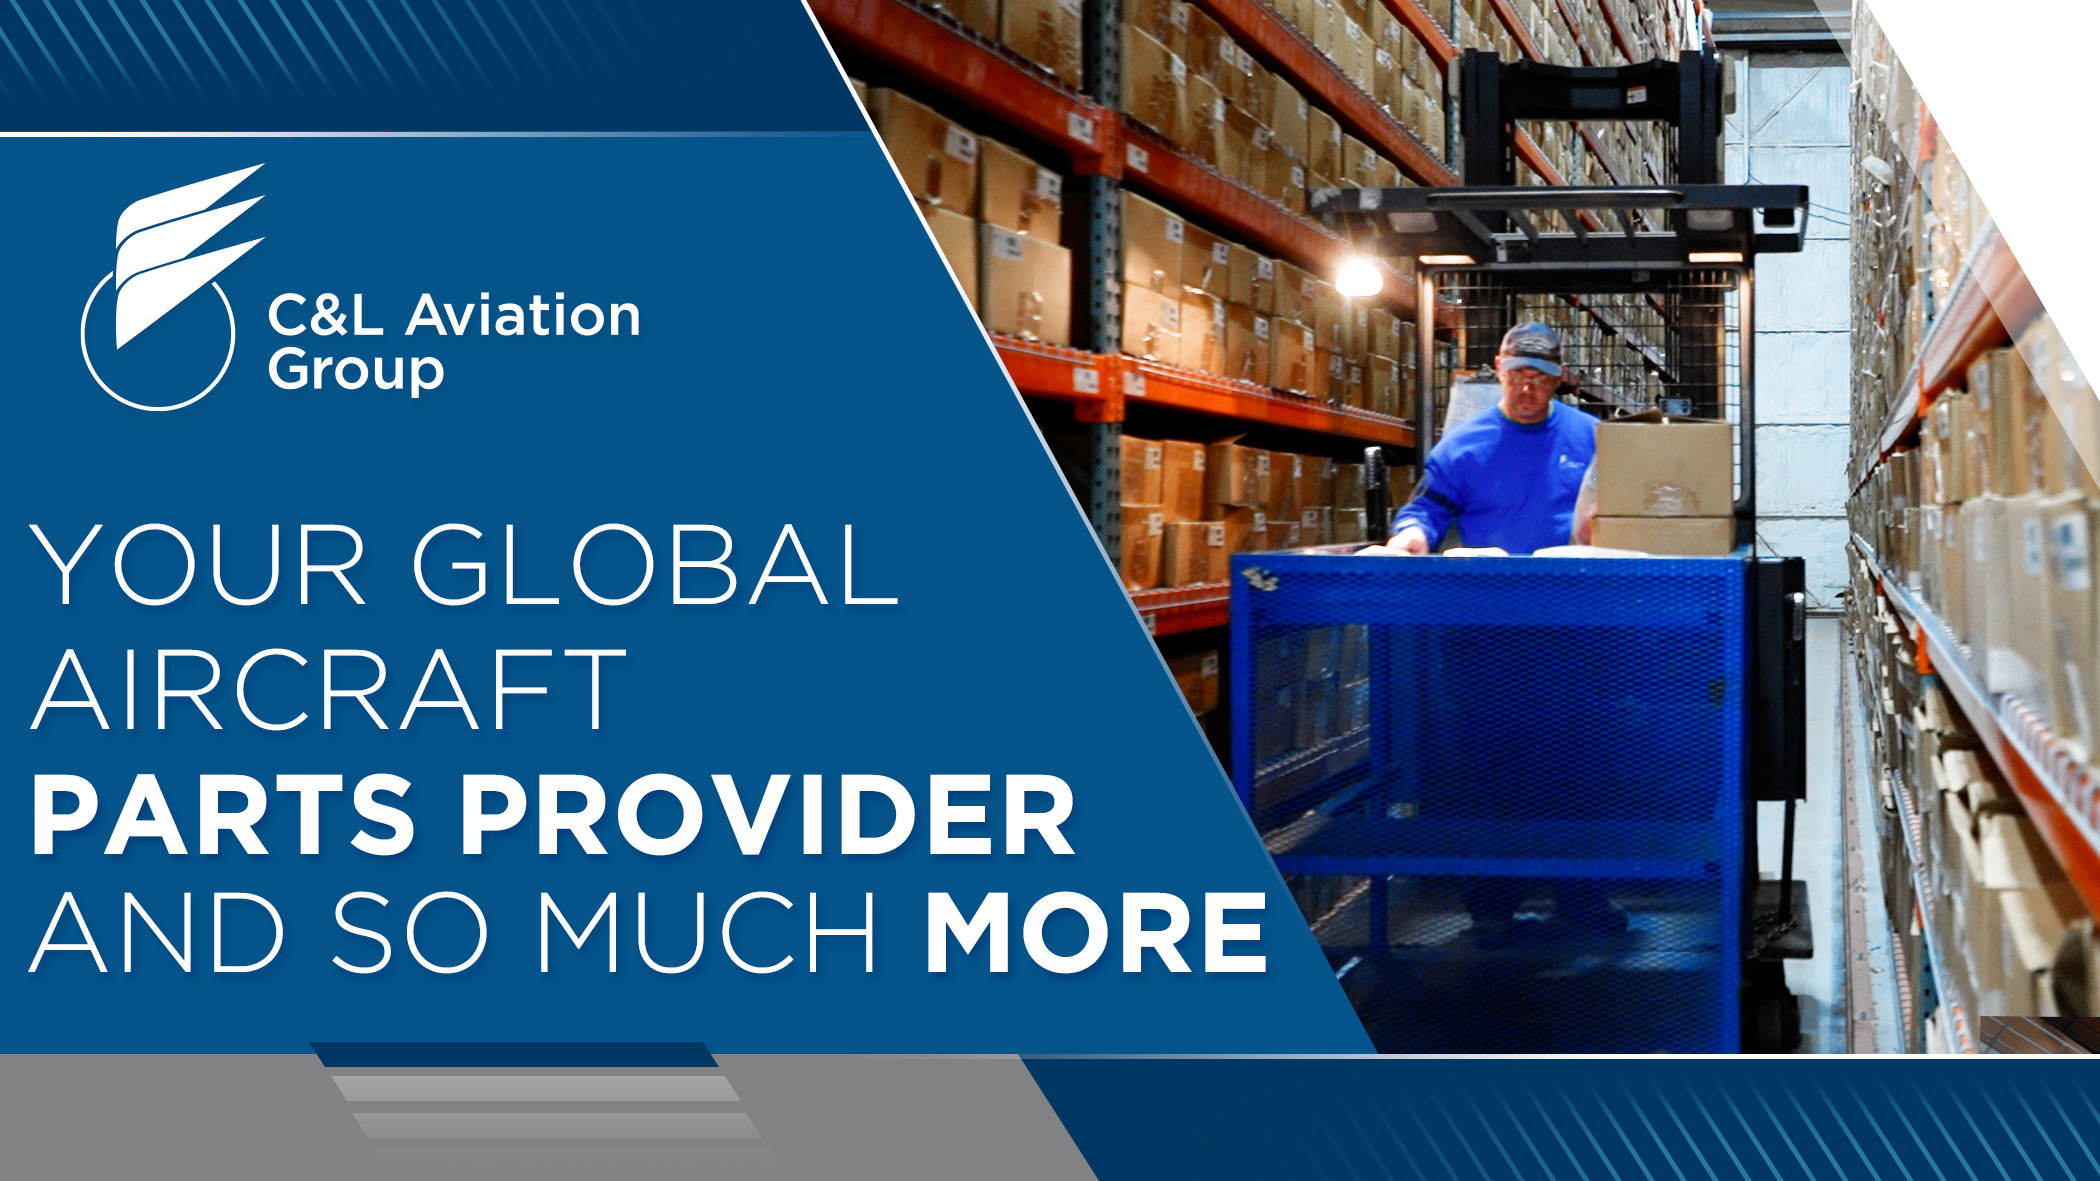 C&L Aviation Group - Your Global Aircraft Parts Provider, and So Much More.